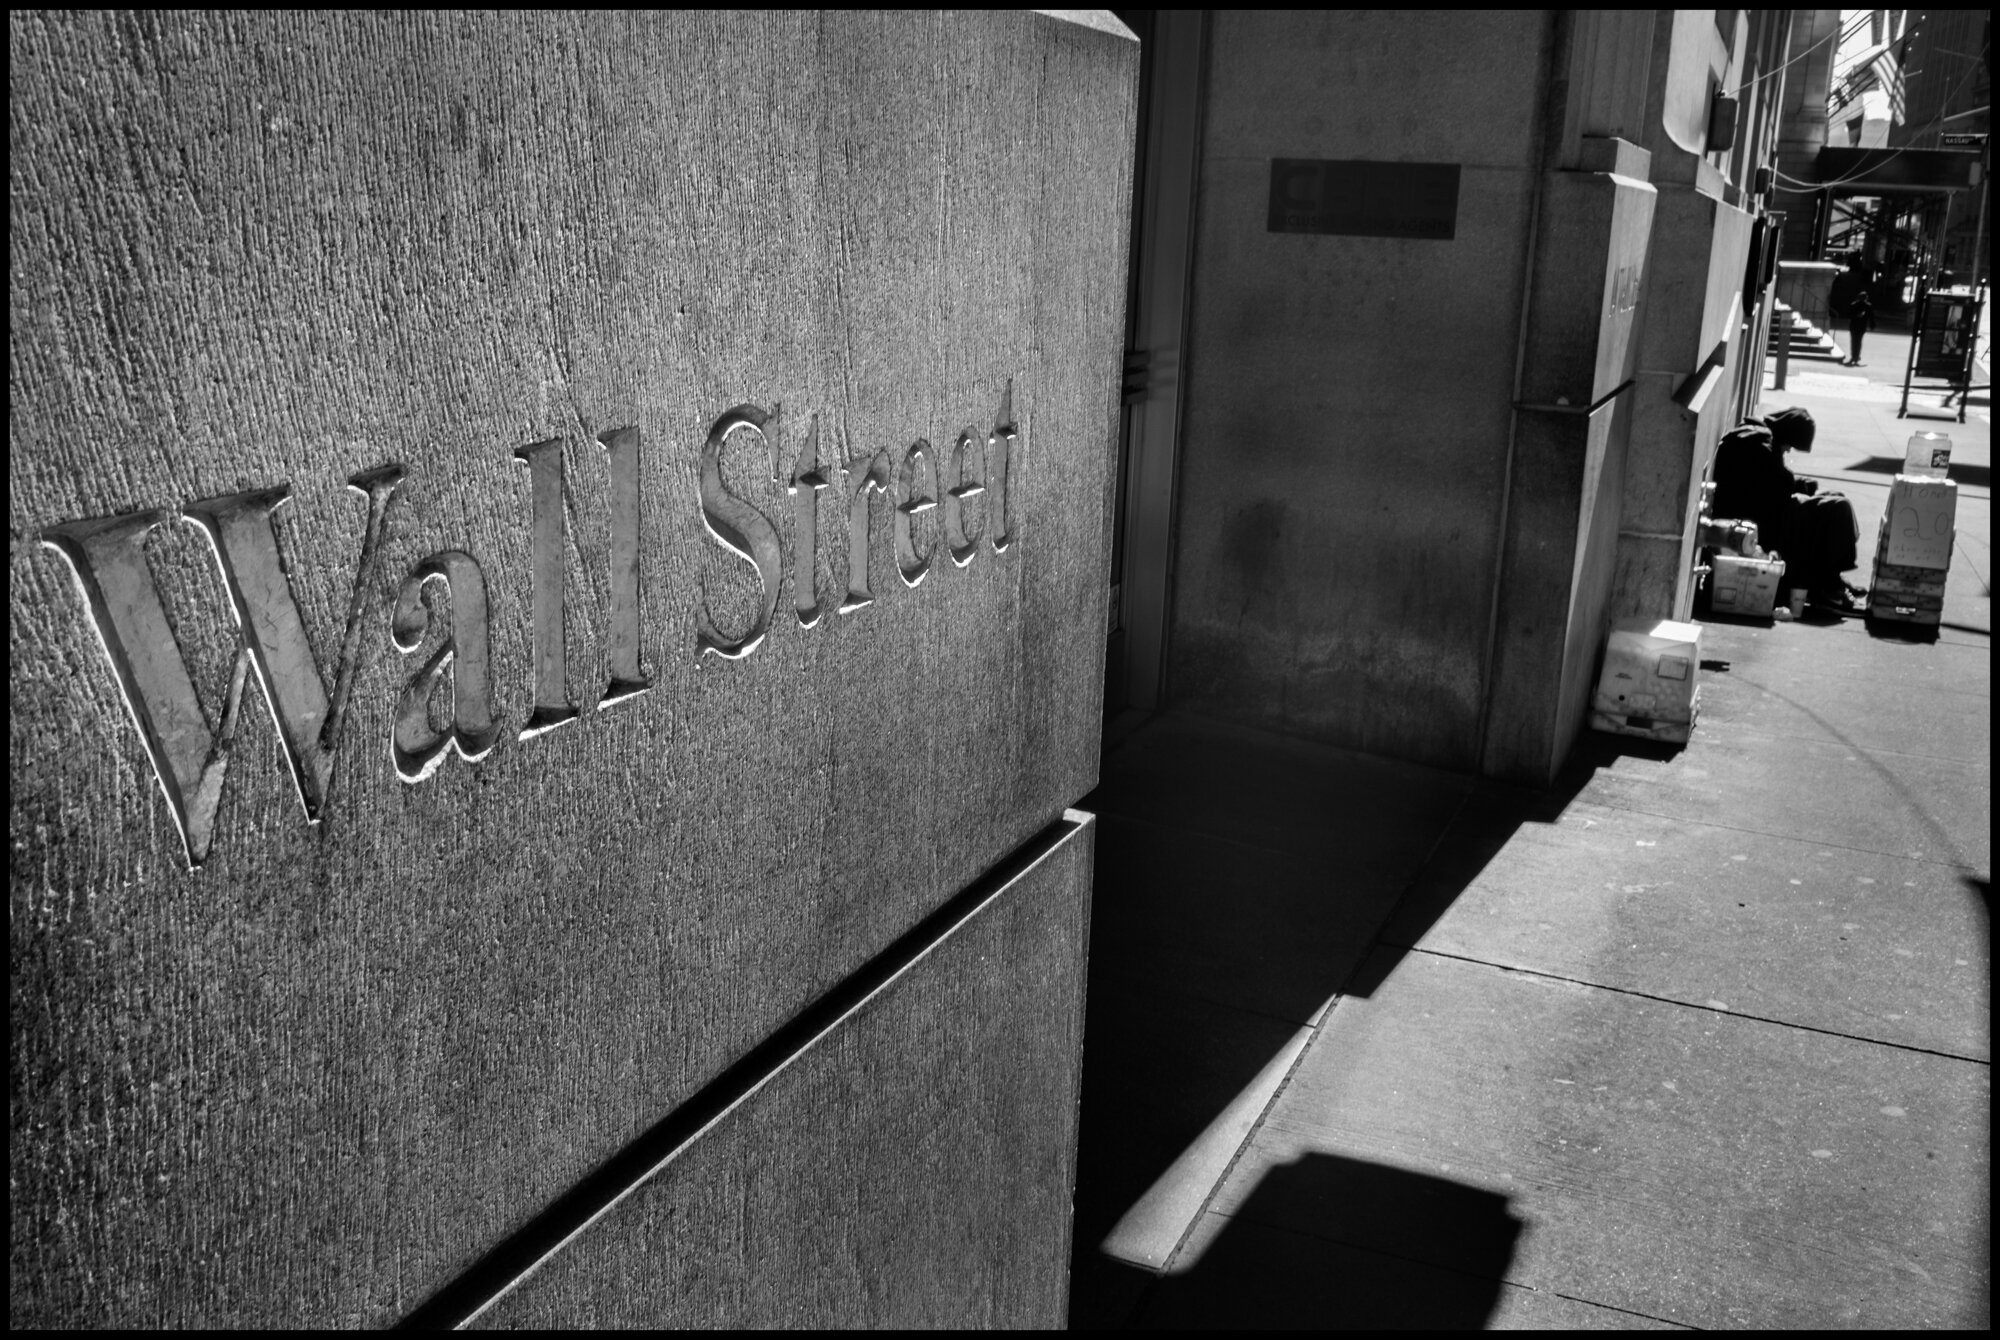  A woman begs for money for food on Wall Street, the financial center of the world.  March 26, 2020 ©Peter Turnley  ID# 04-003 